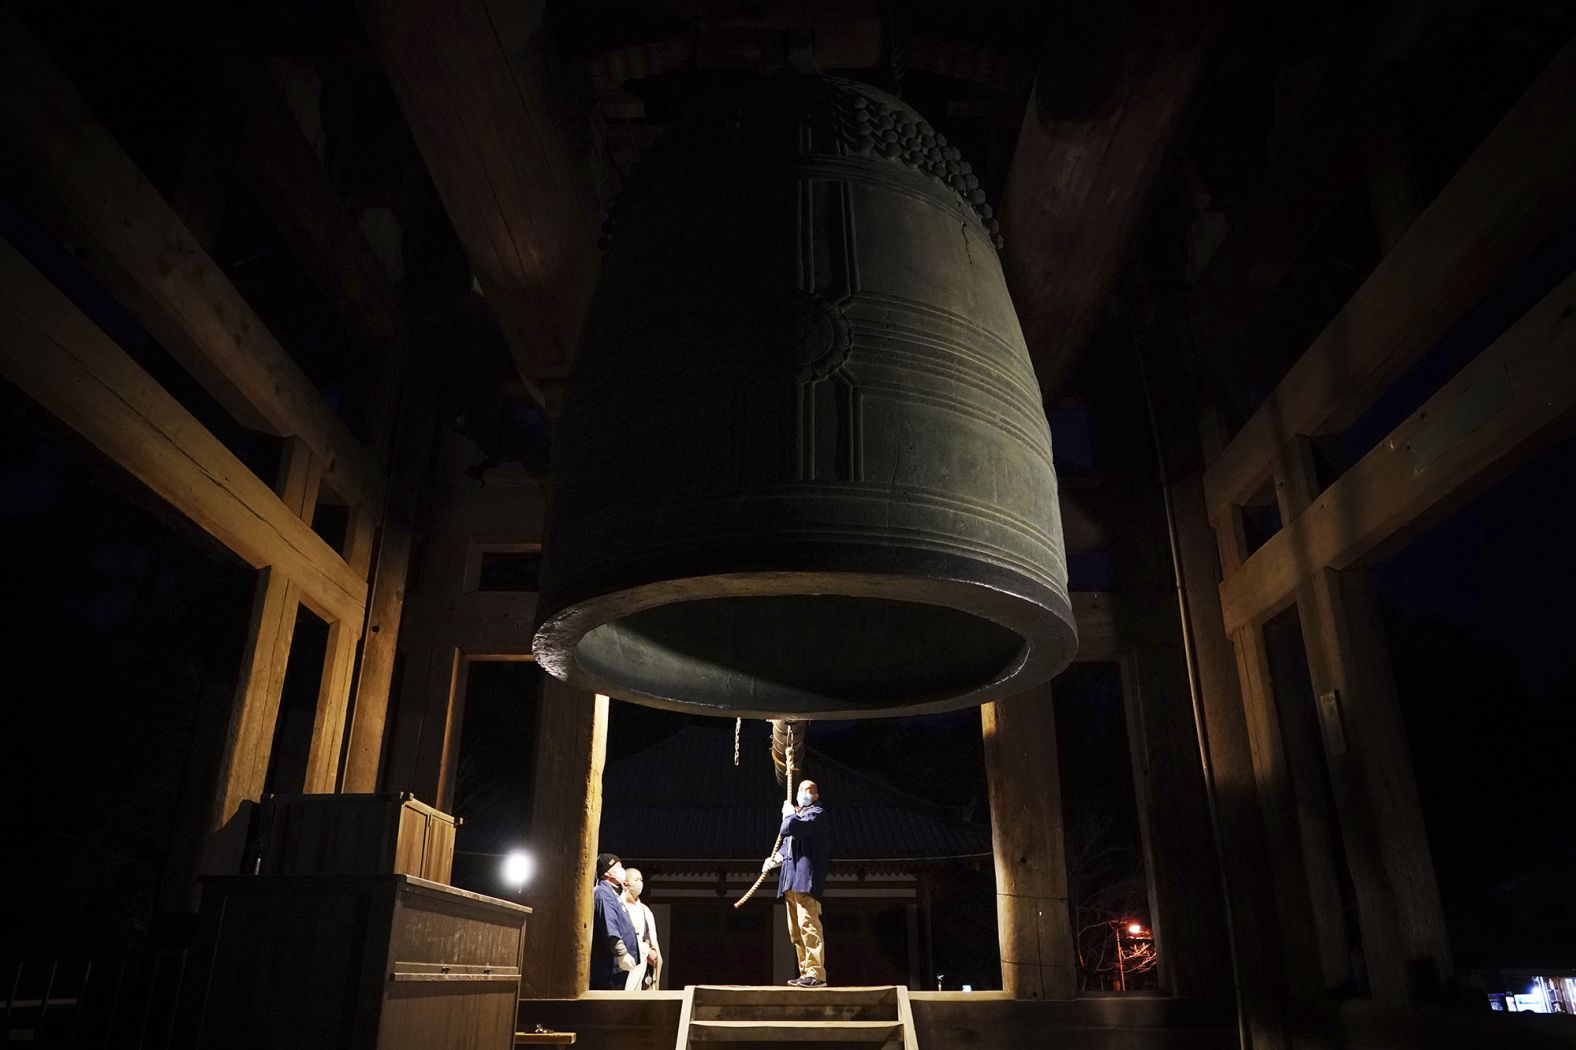 Joya-no-kane, a bell-ringing ceremony, is held at the Todaijii Temple in Nara, Japan. Usually worshippers are allowed to ring the bell, but the ceremony was more restricted this year.